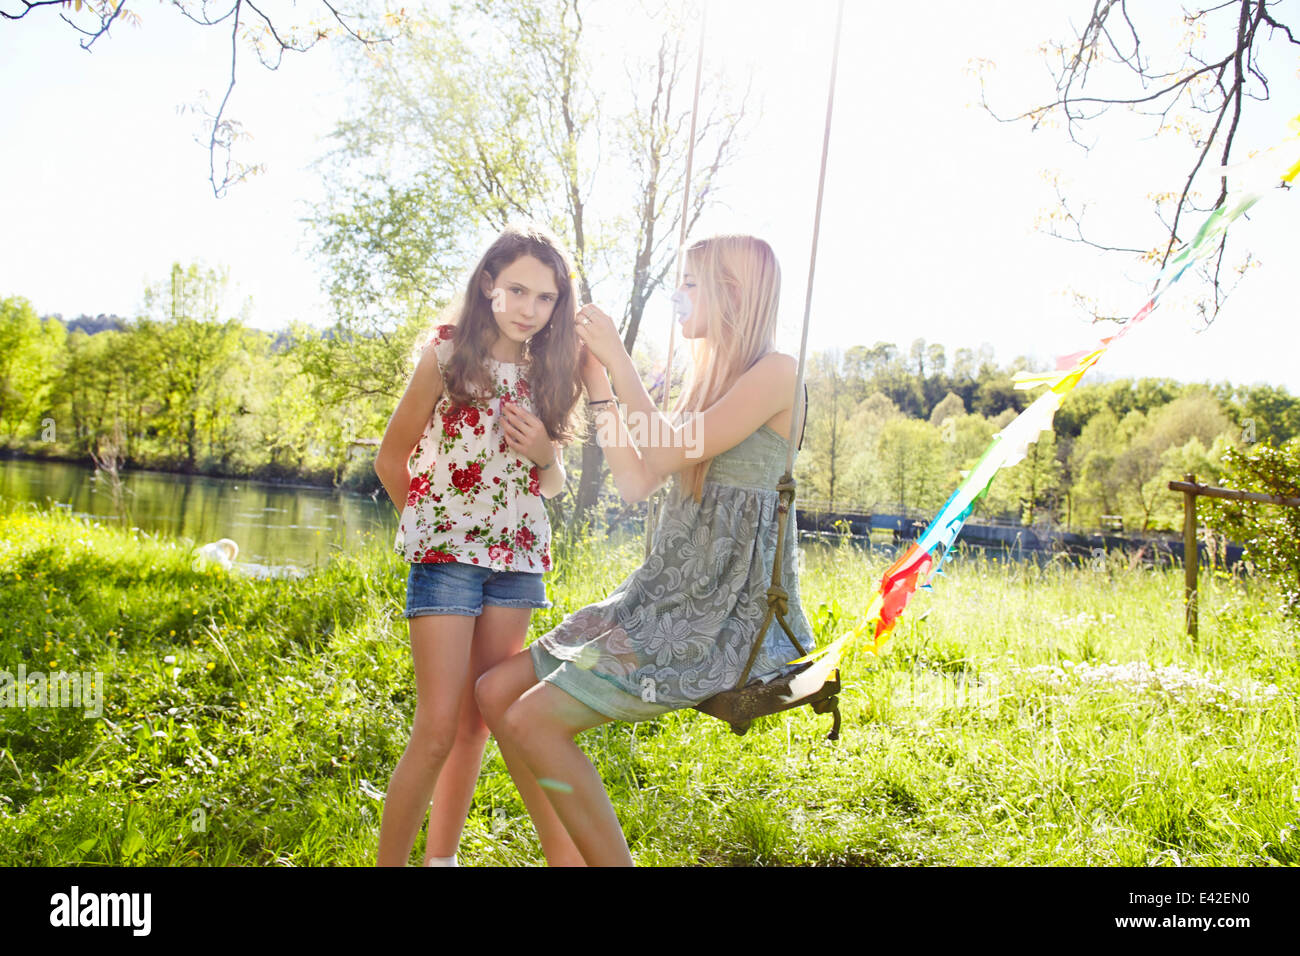 Young woman on swing with friend Stock Photo